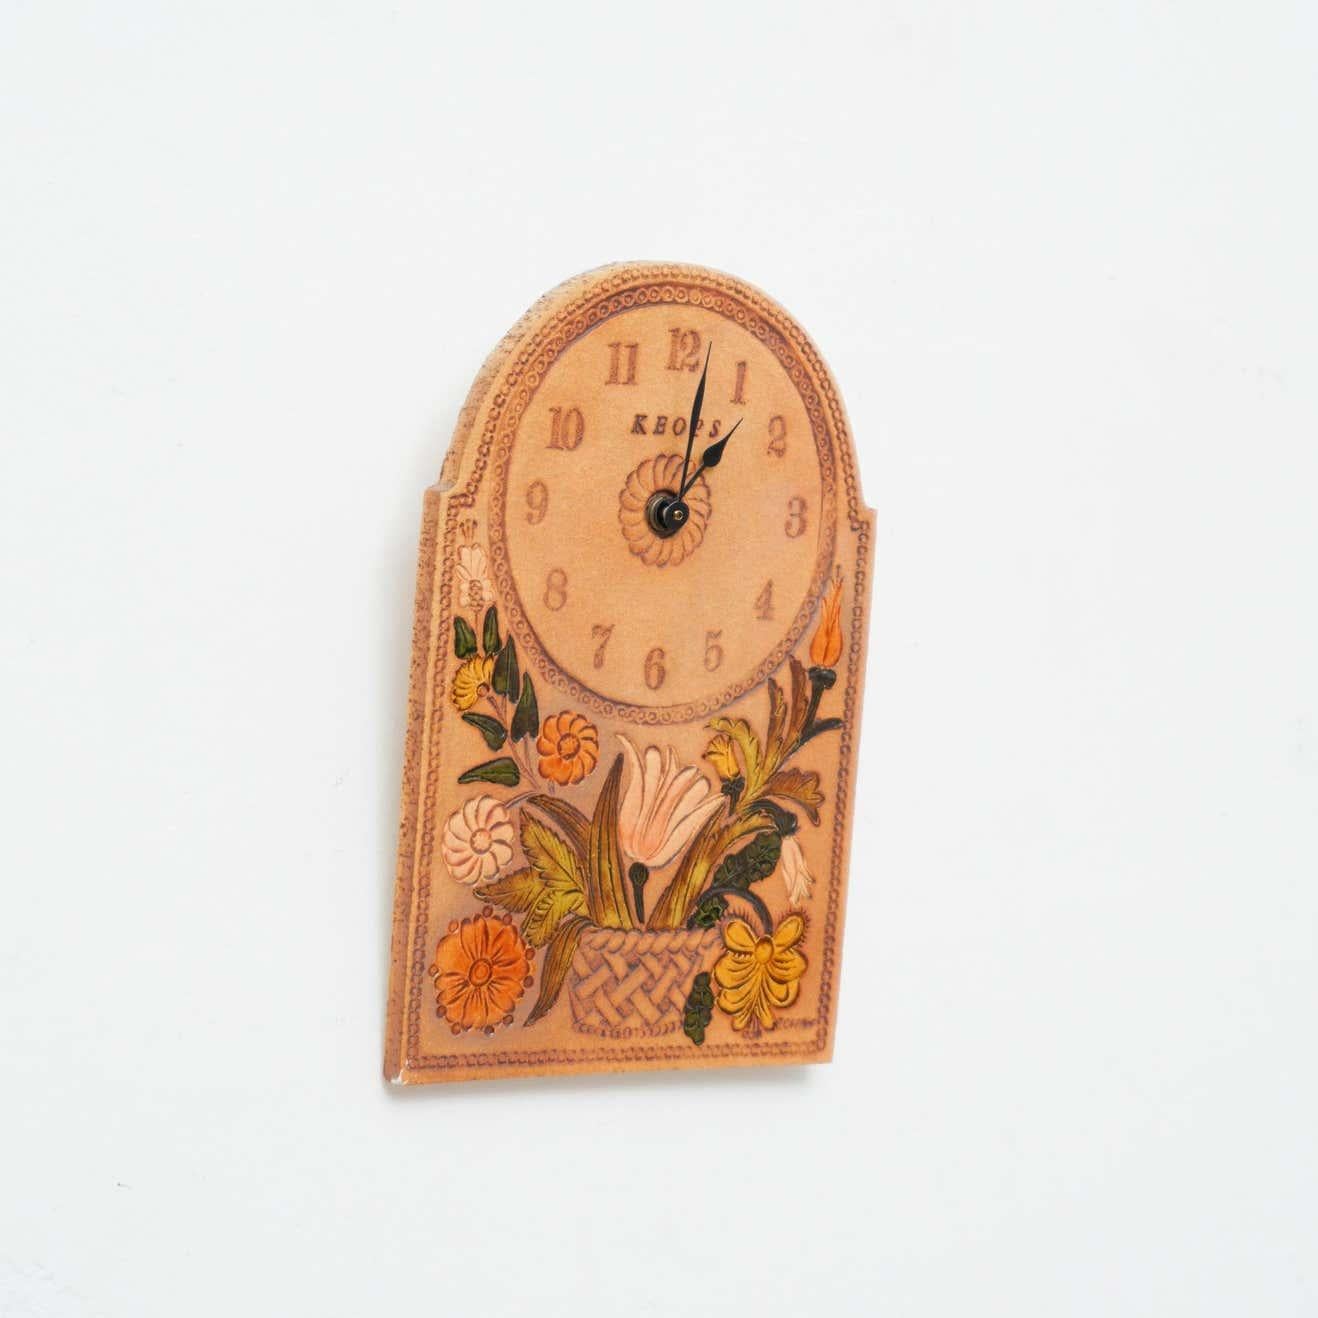 Roger Capron wall mounted ceramic clock, circa 1960.
By Roger Capron, signed. (France).

In original condition with minor wear consistent of age and use, preserving a beautiful patina.